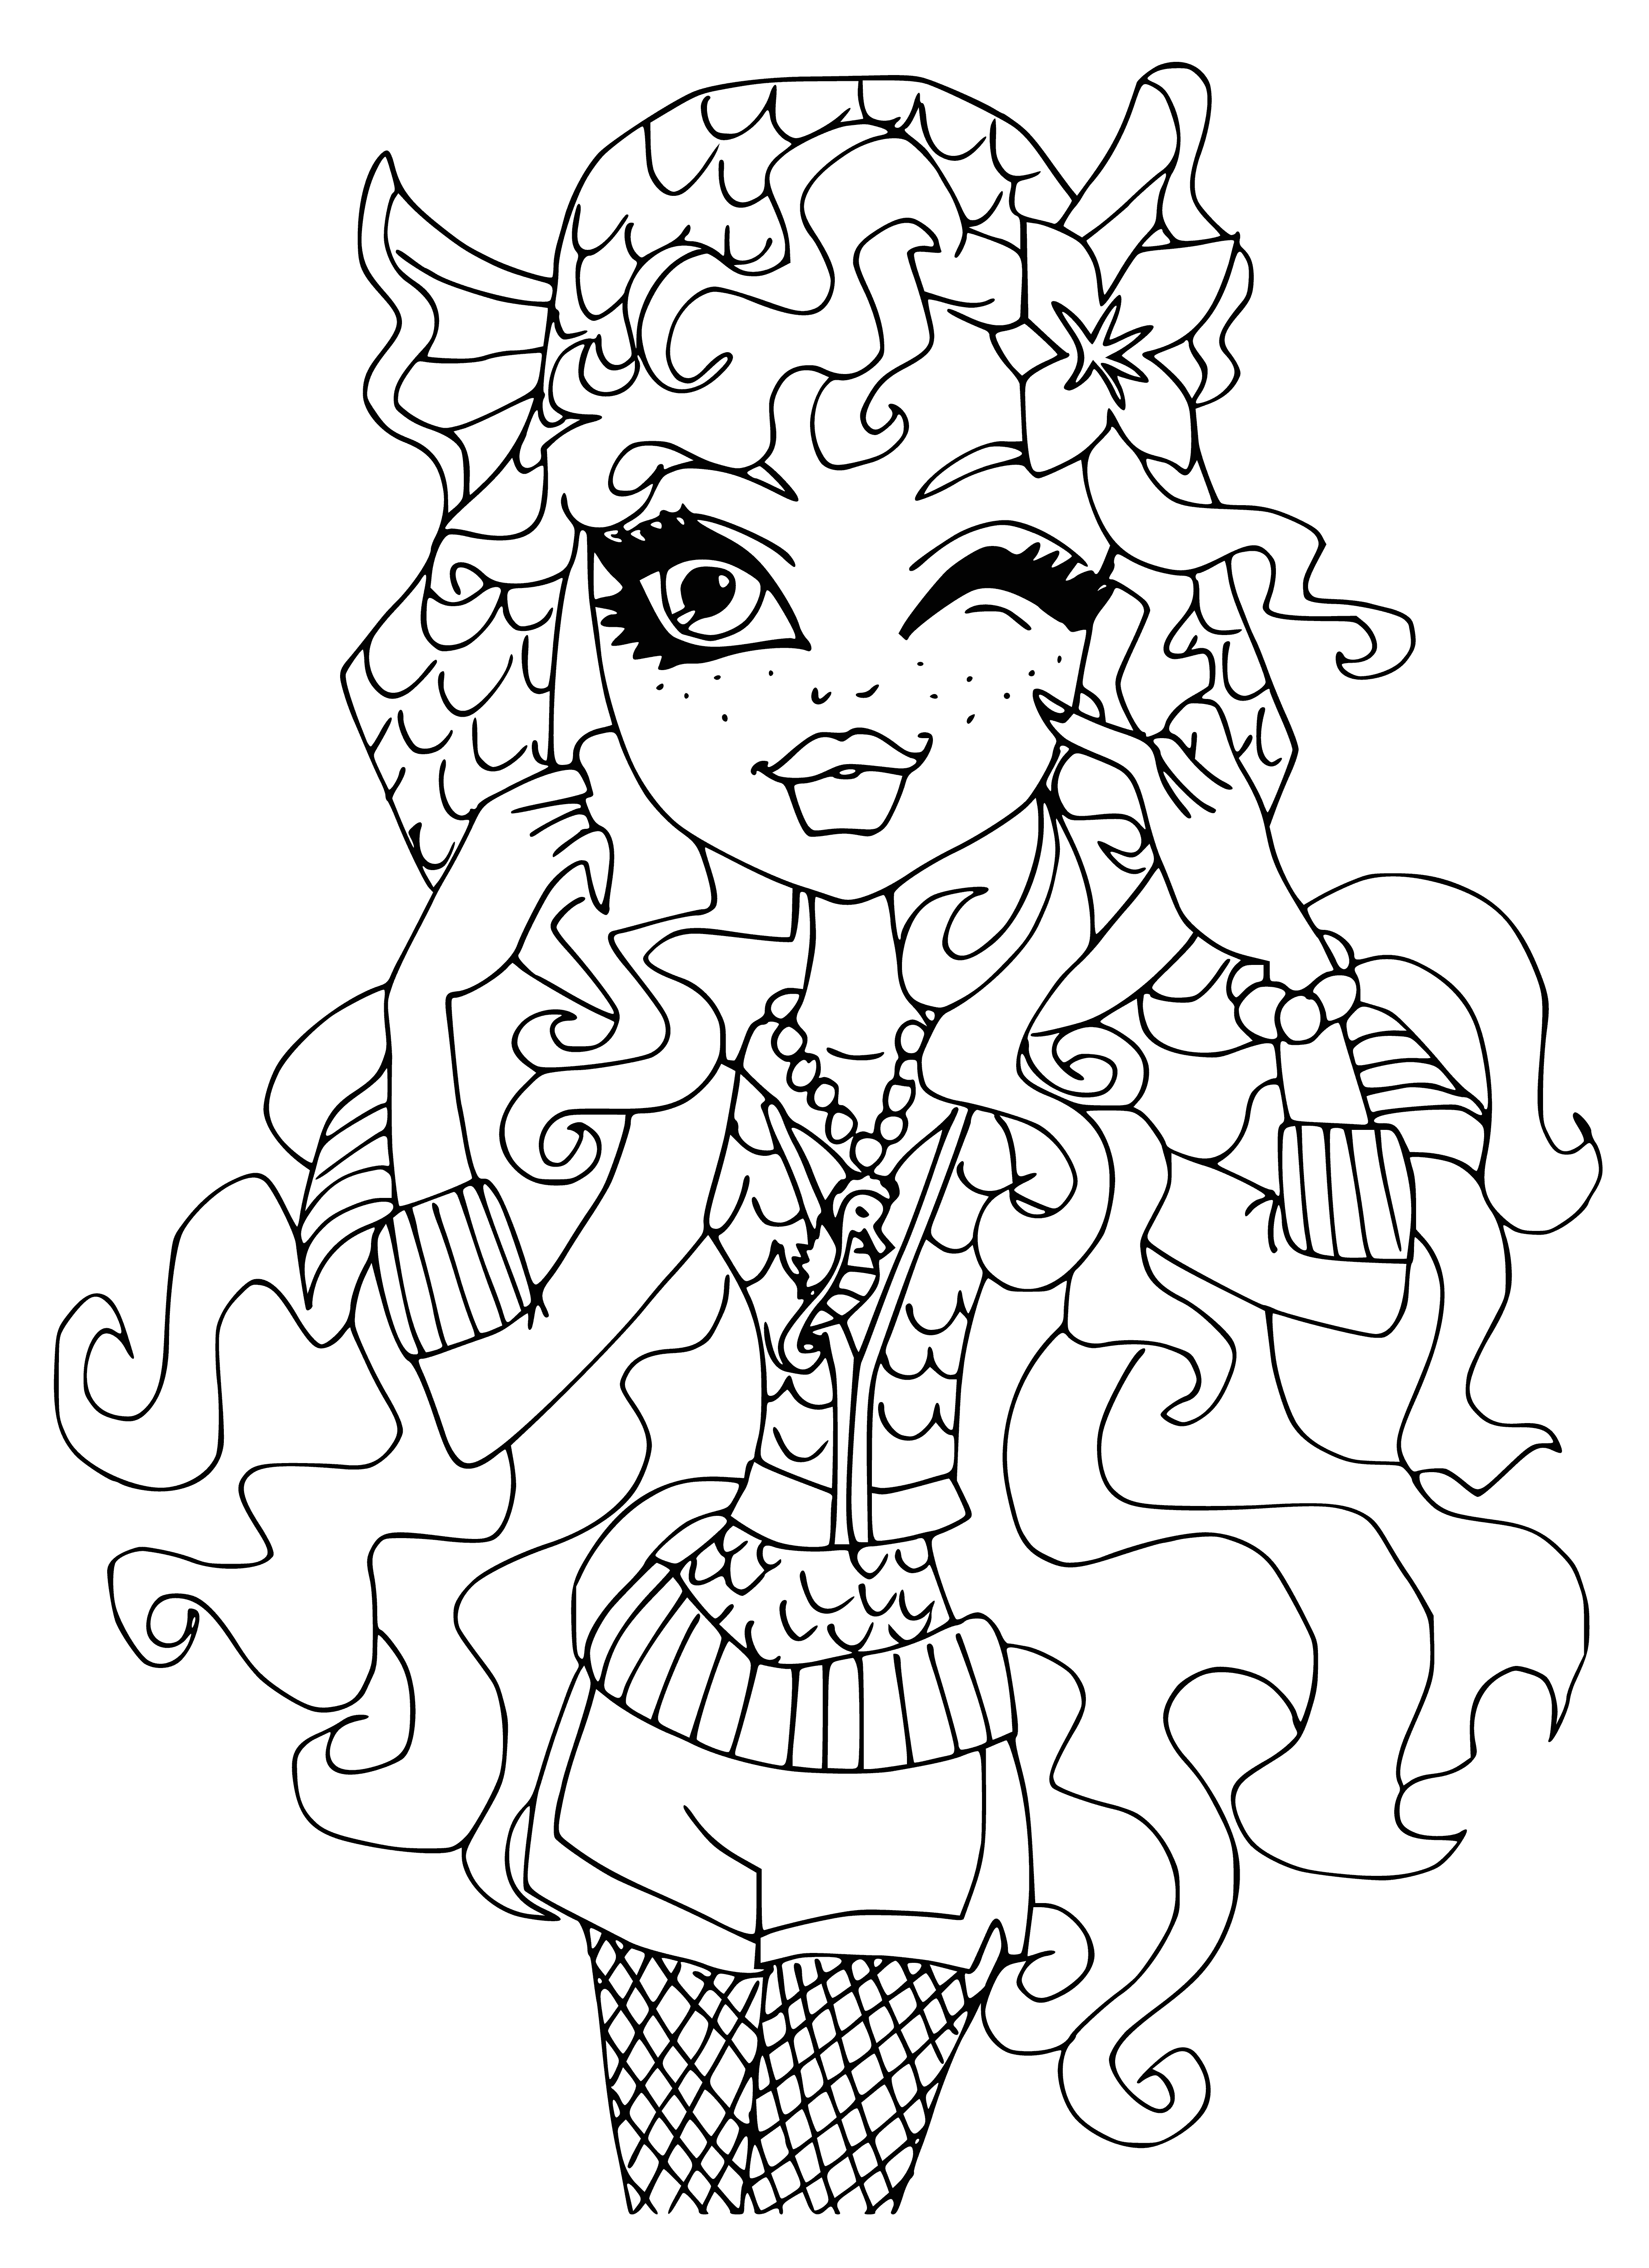 coloring page: Lagoona Blue is a blue-skinned, green-haired girl wearing a pink dress with a blue fishtail, a blue belt w/starfish buckle & a blue bracelet.